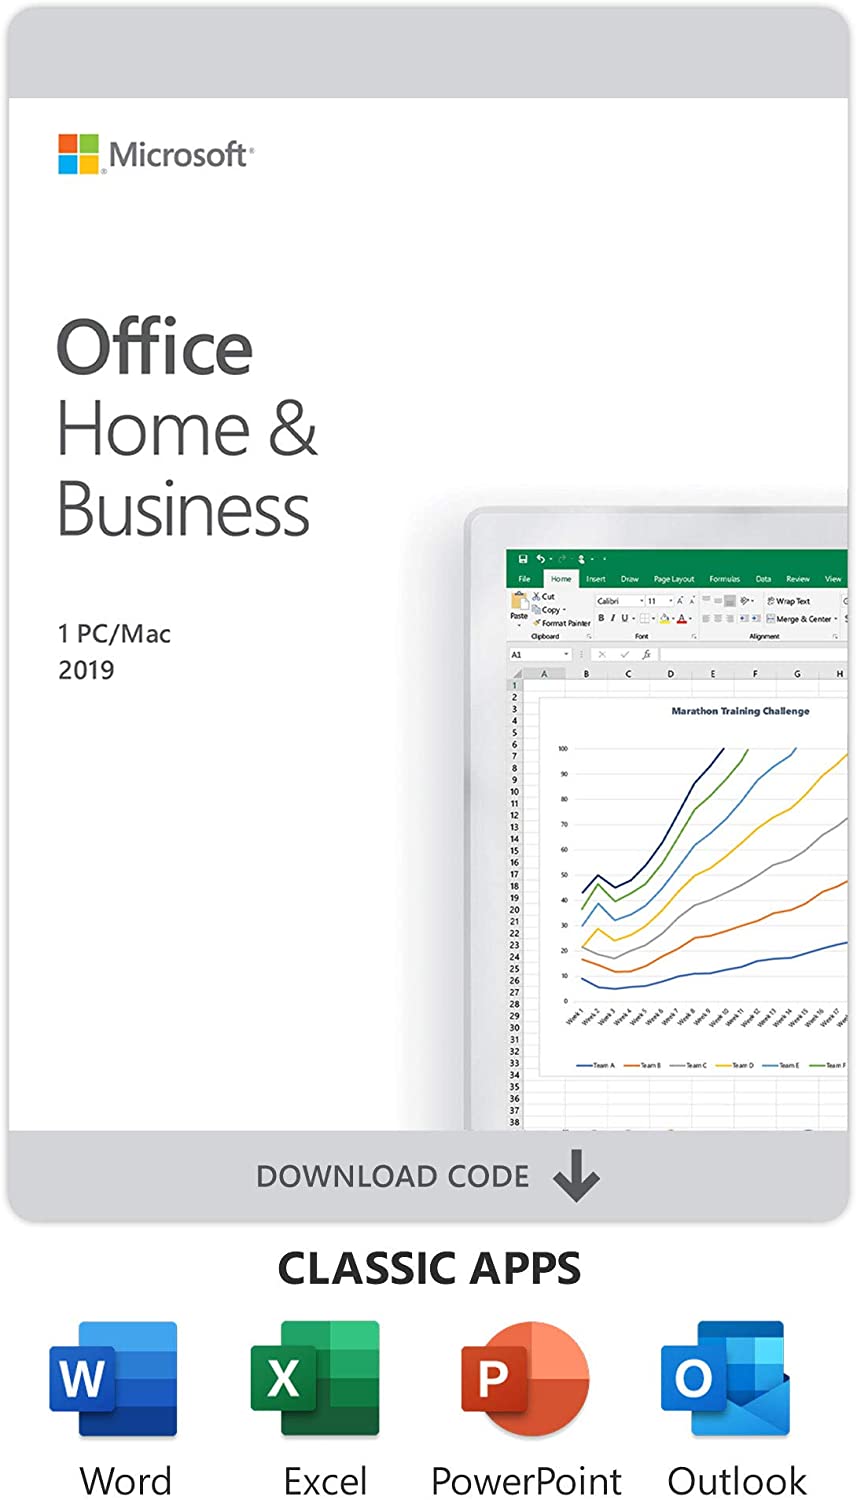 do you need to buy microsoft office for mac if you already have it?